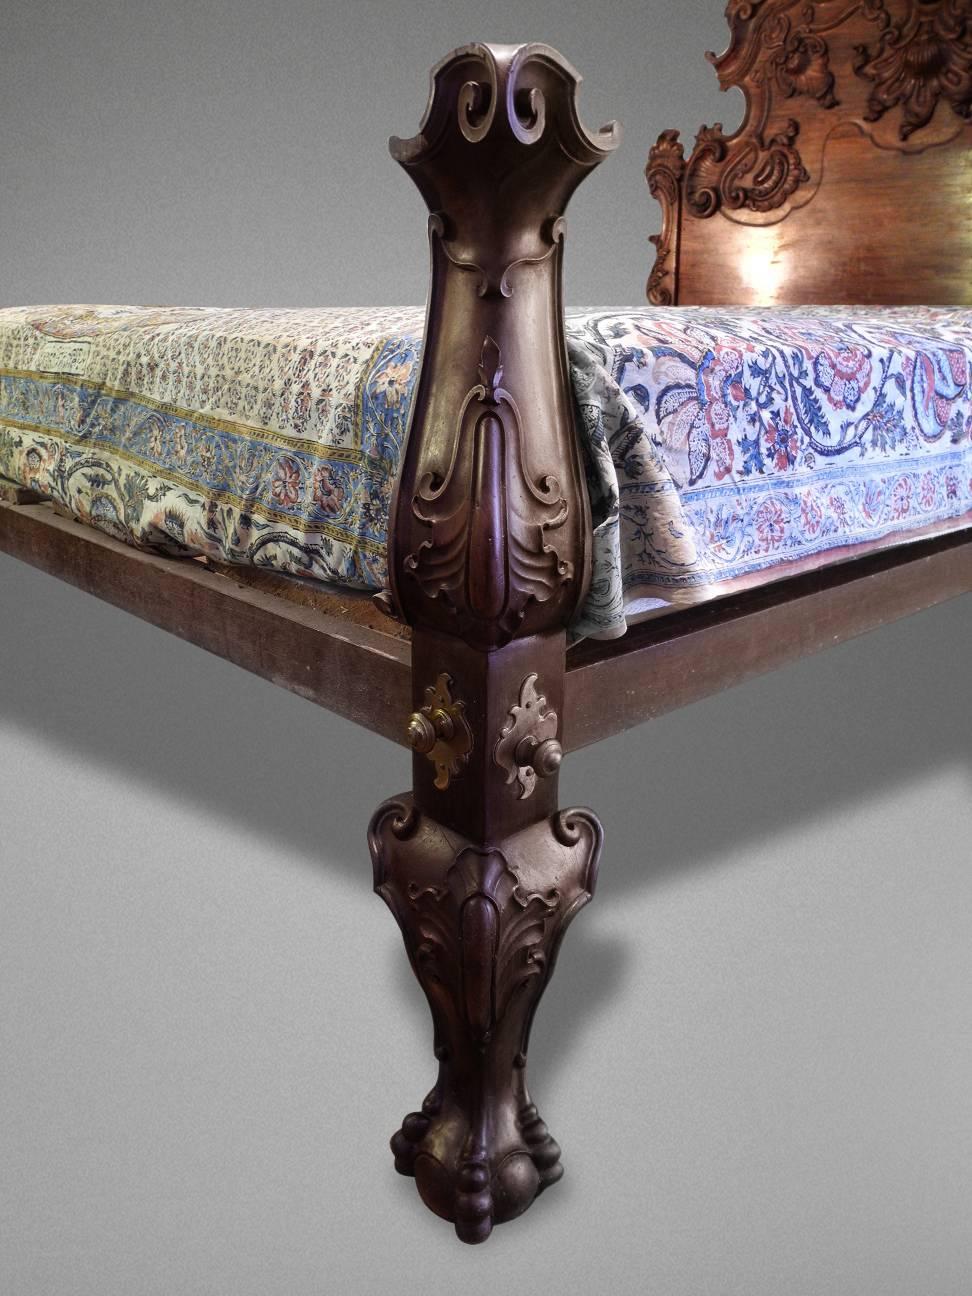 Carved Rare Mid-18th Century Indo Portuguesse Bed For Sale